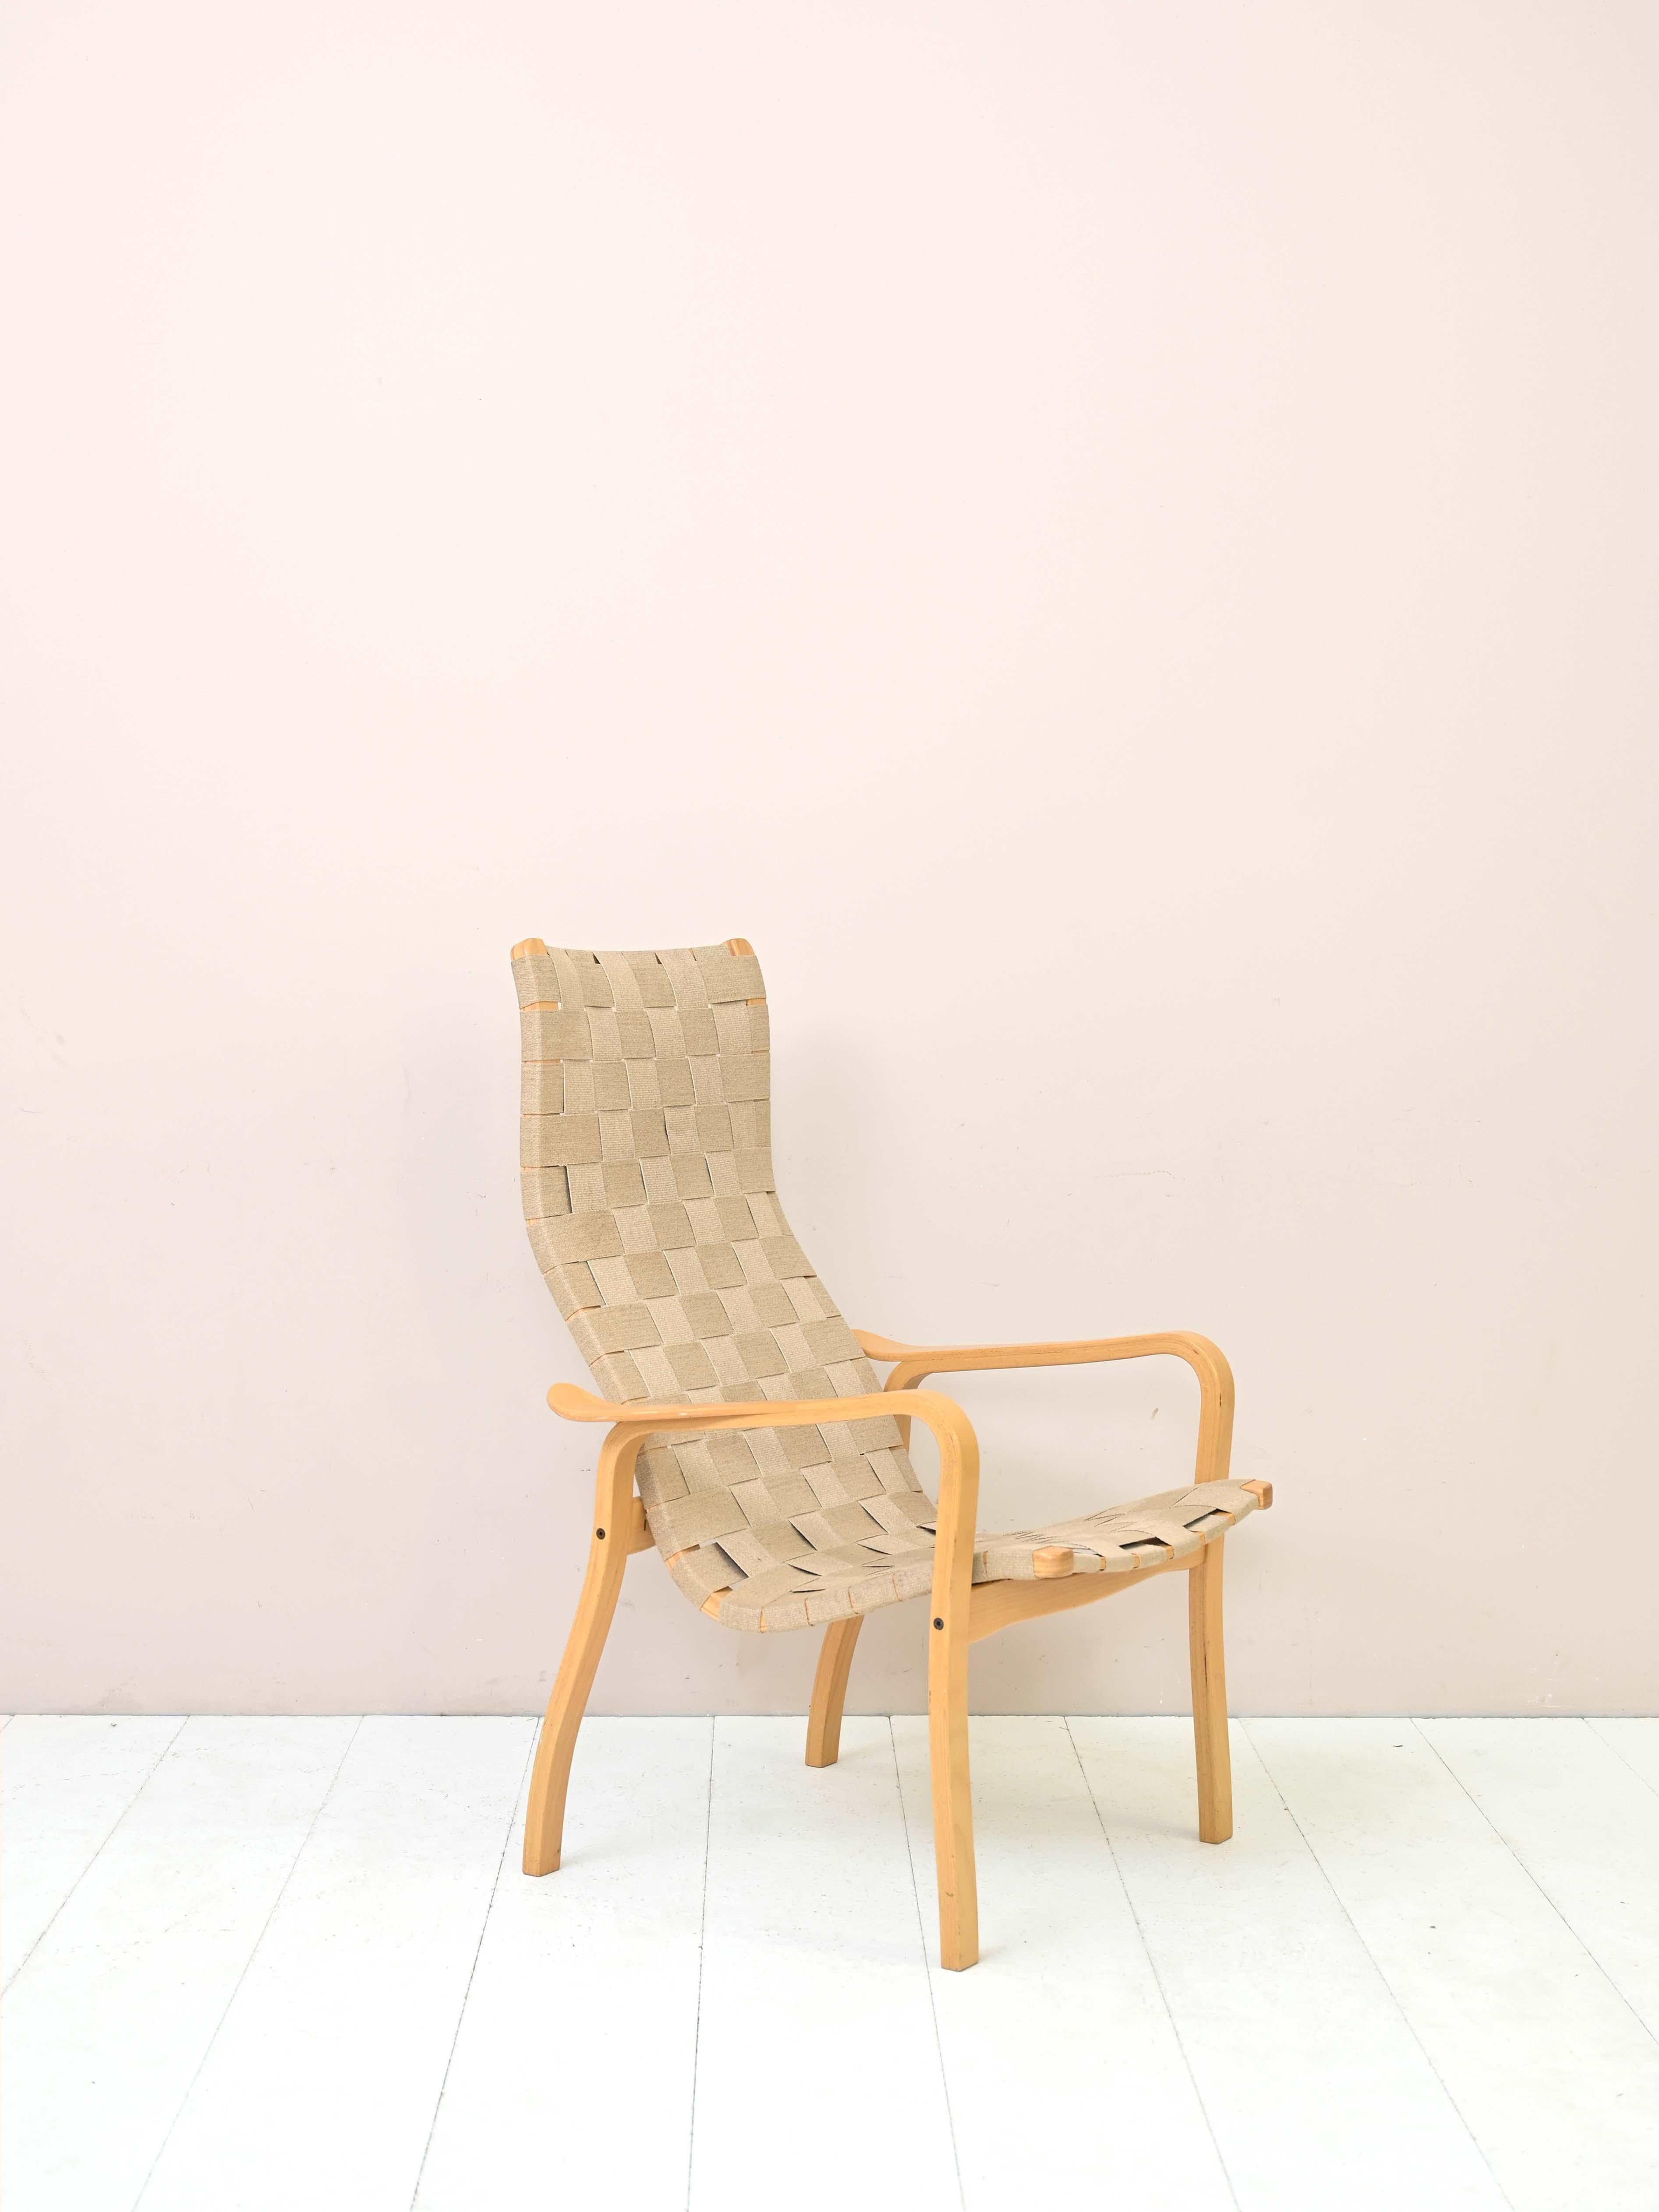 'Primo' model armchair designed by Yngve Ekström for the Swedese company.
This model is an alternative to the classic Lamino model armchair.
A Scandinavian design armchair that became an icon in the 1960s/70s.
The frame is made of beech wood and